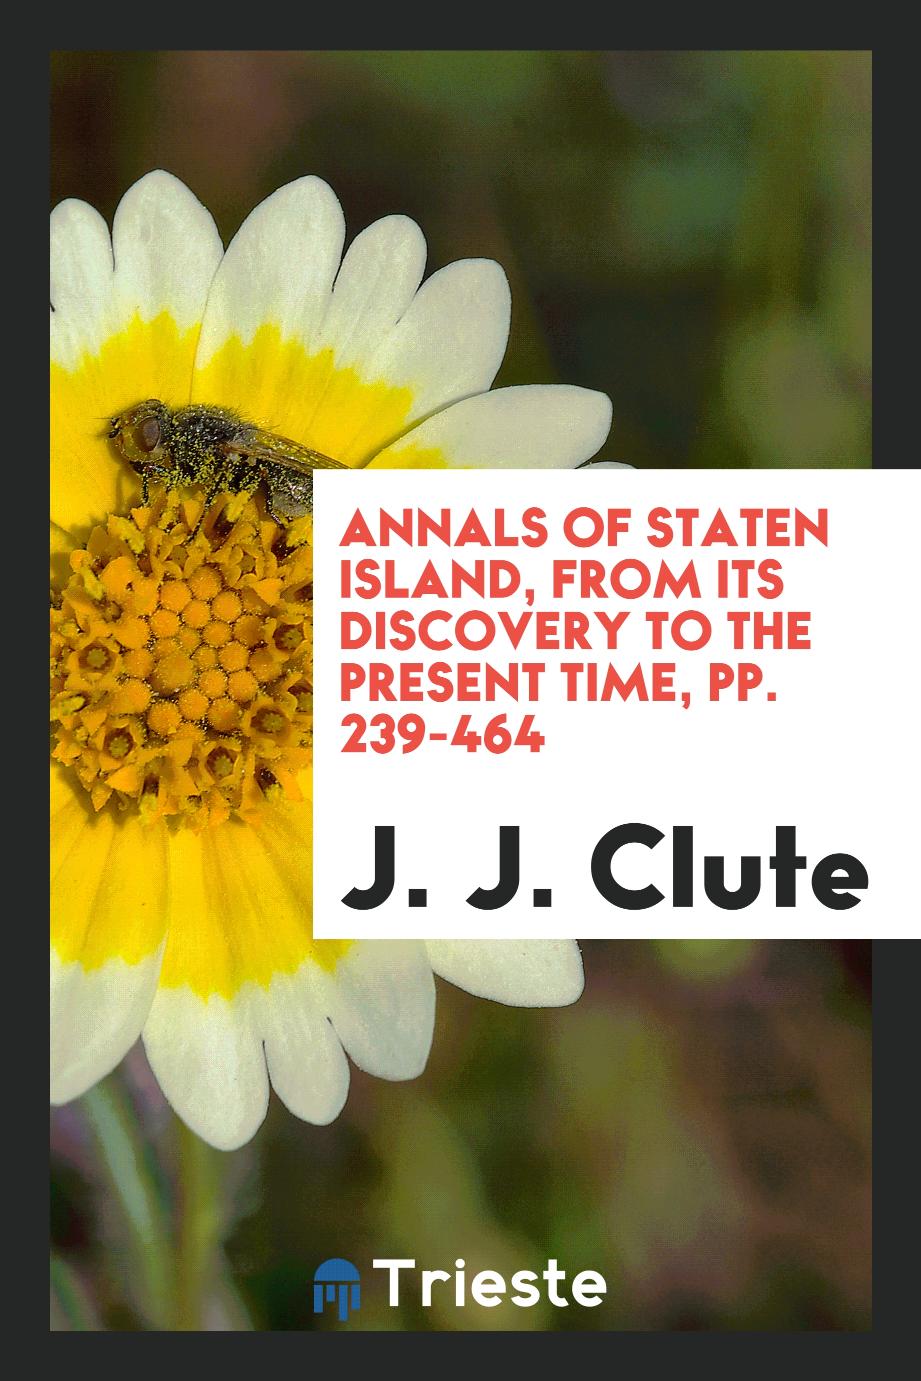 Annals of Staten Island, from Its Discovery to the Present Time, pp. 239-464